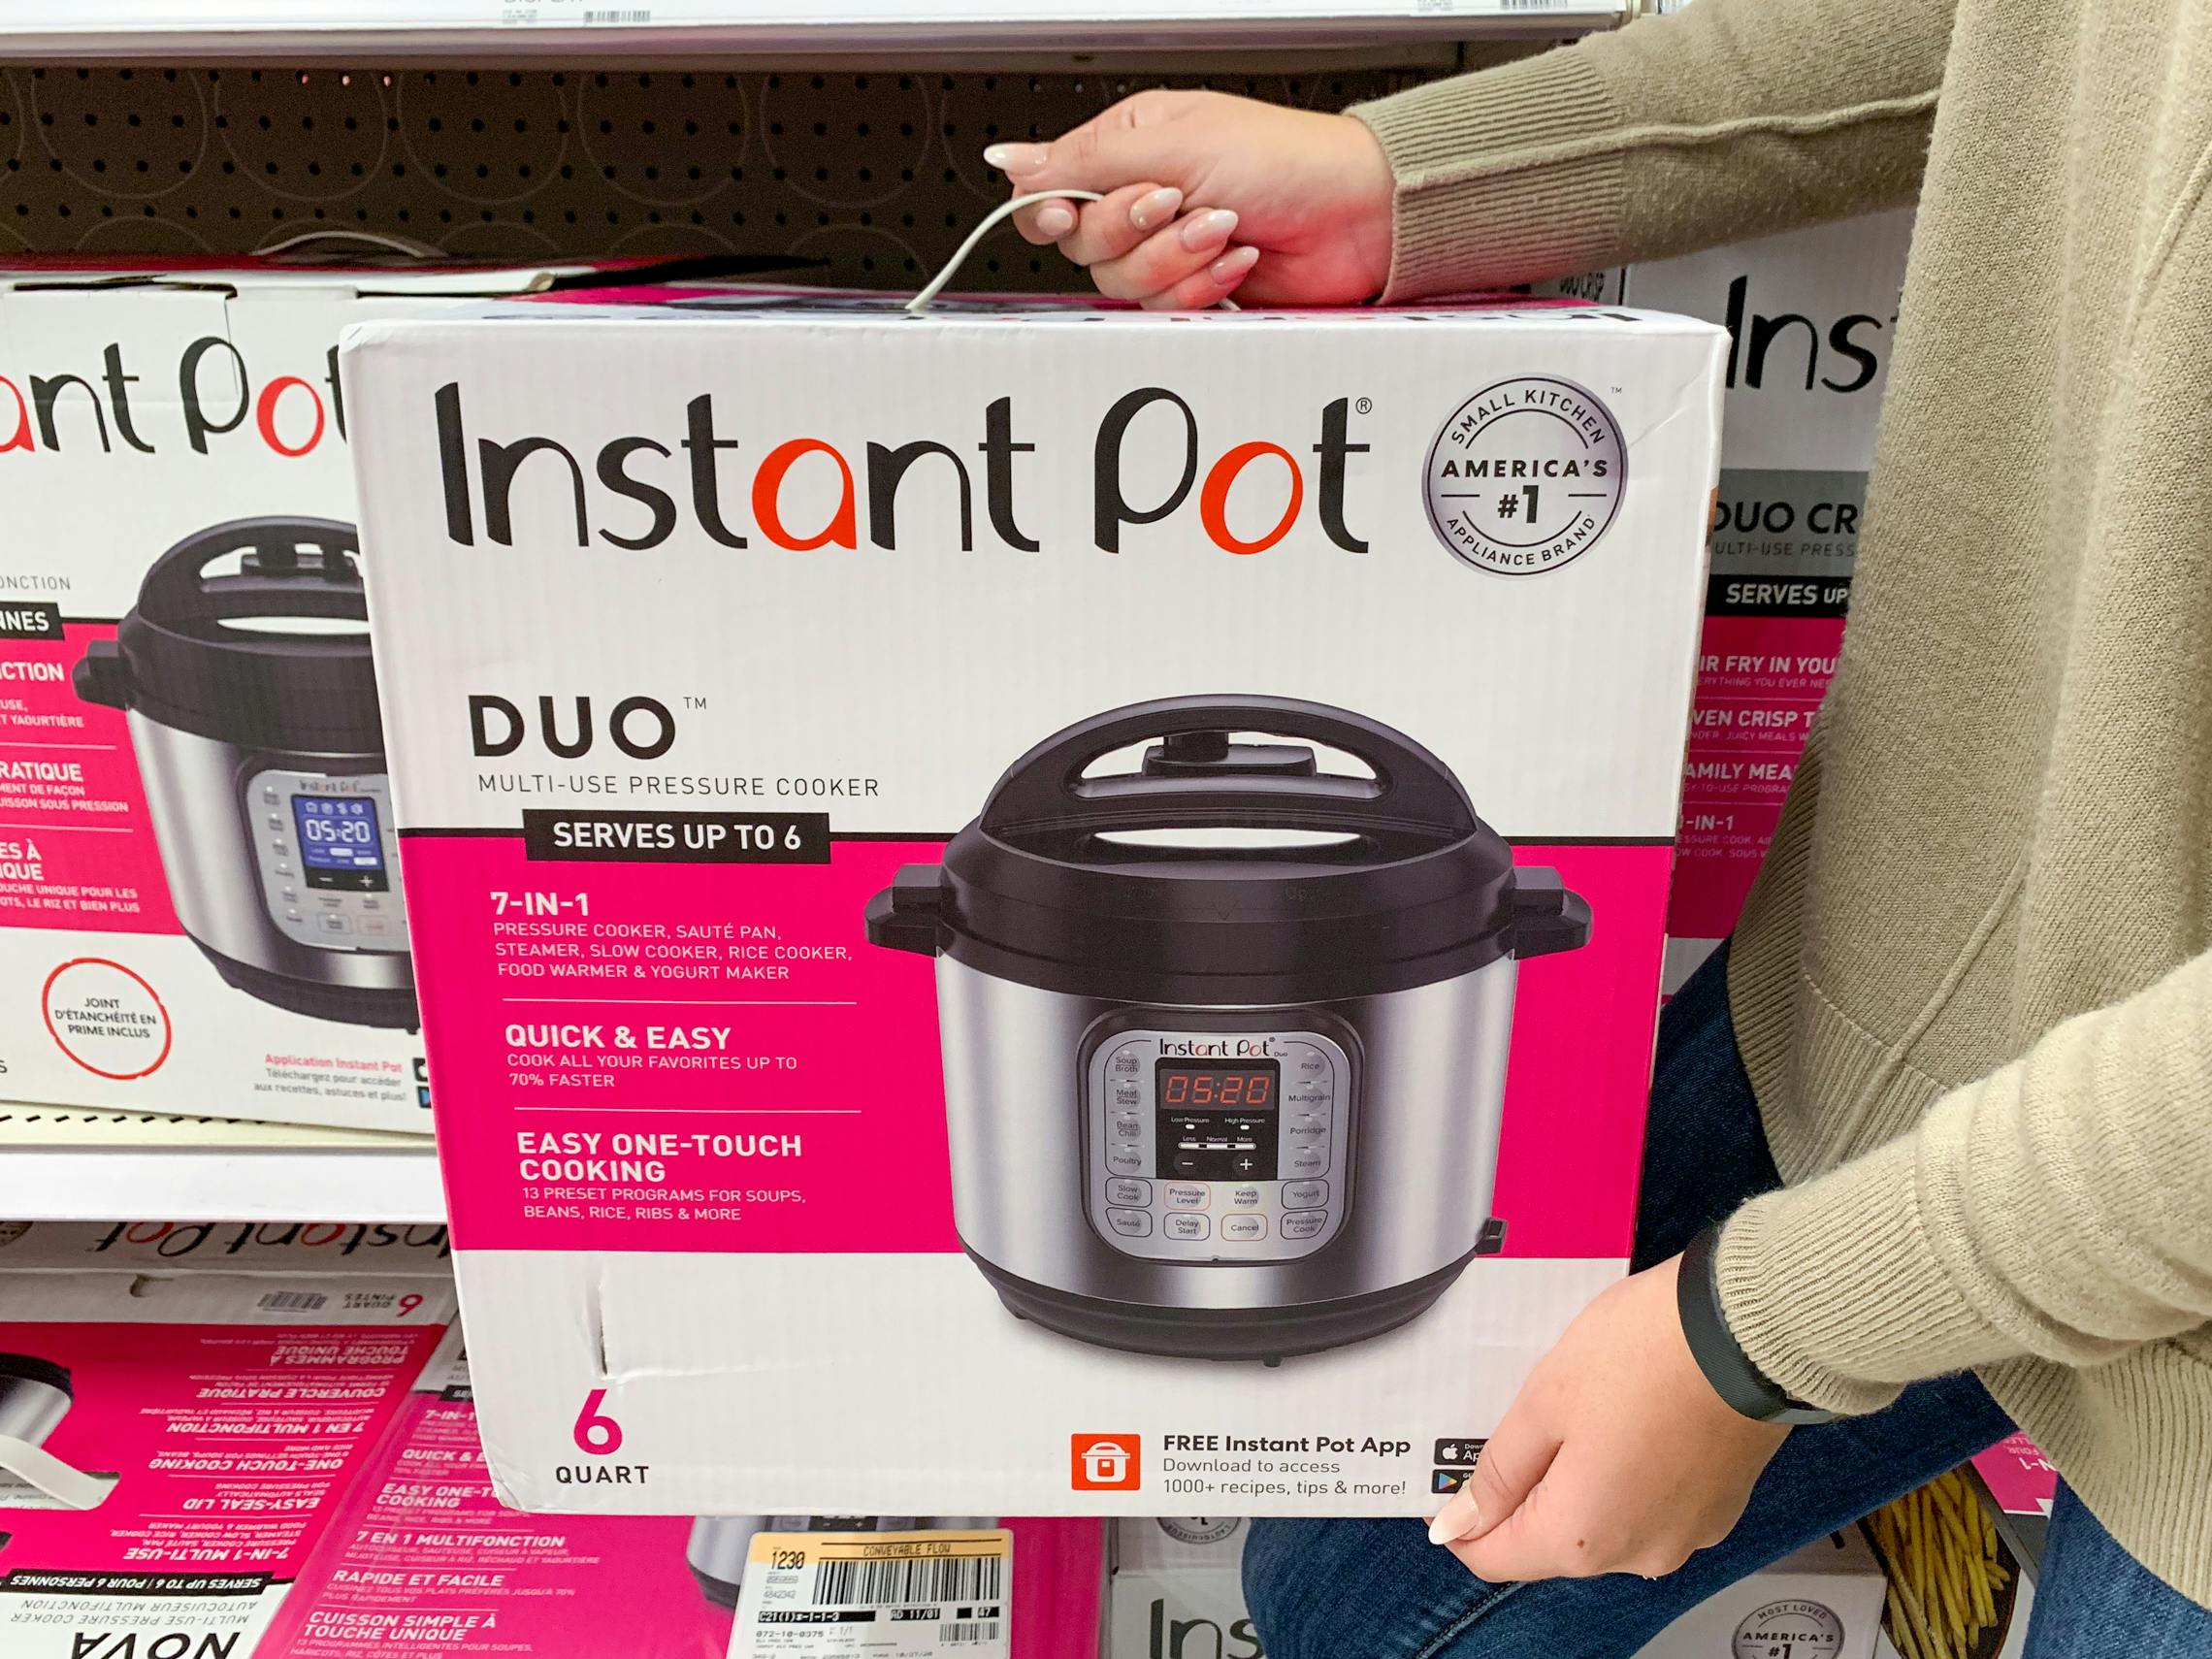 https://content-images.thekrazycouponlady.com/nie44ndm9bqr/1a3P8wWtIMNdtR3PUcROke/88f1fa67cd7c613aff7af118a3039c73/target-black-friday-instant-pot-duo-2020-20-1605198863-1605198863.jpg